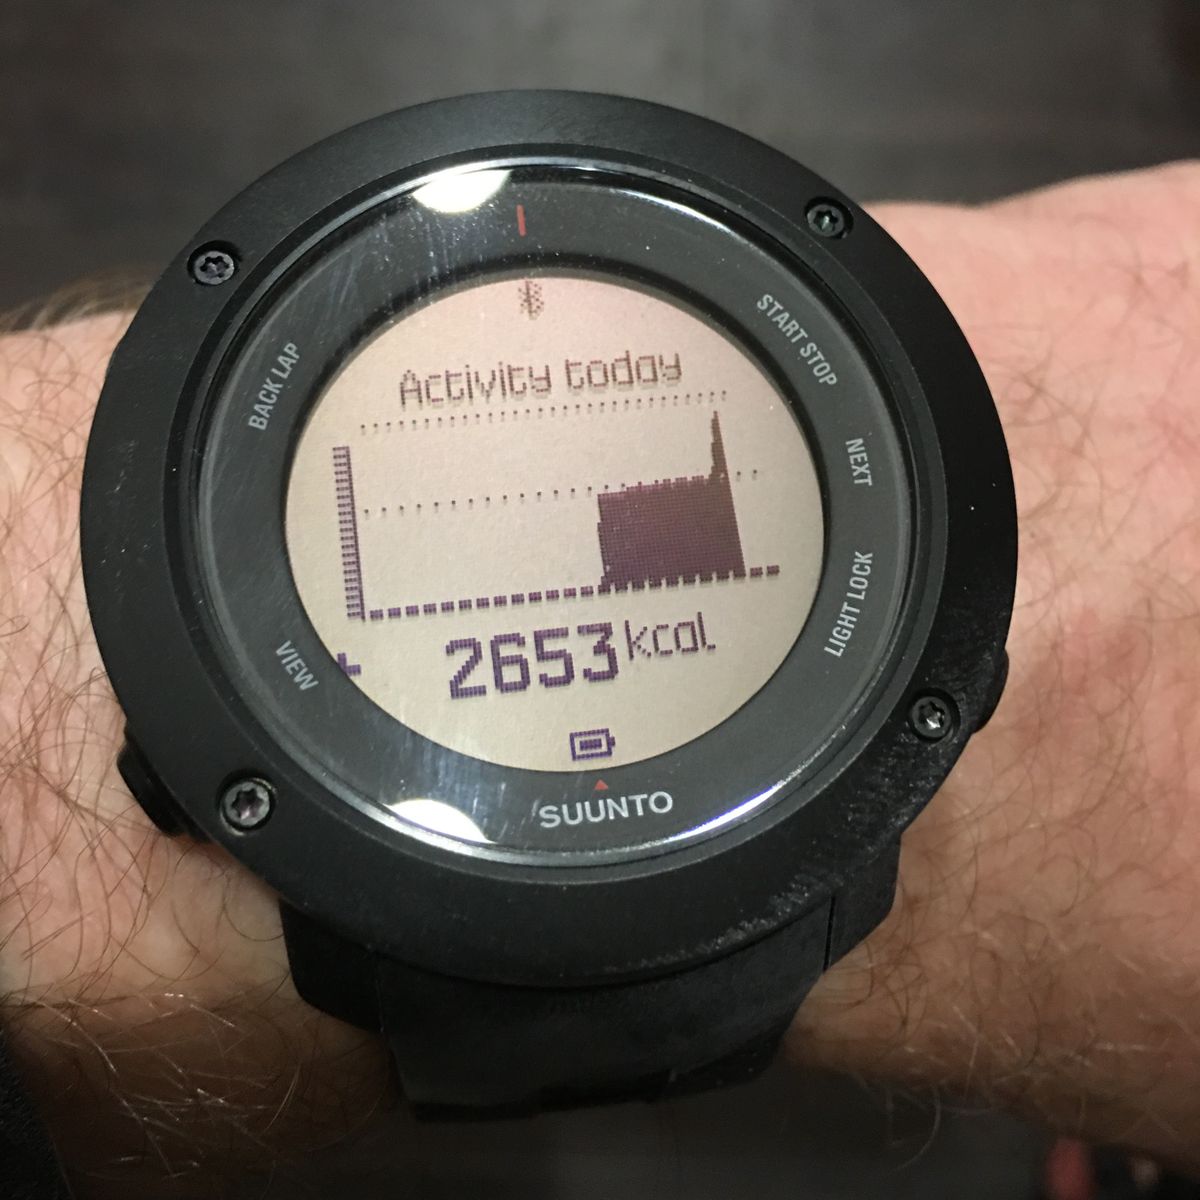 A week with the Suunto Ambit3 Vertical, and thoughts on the Ambit line